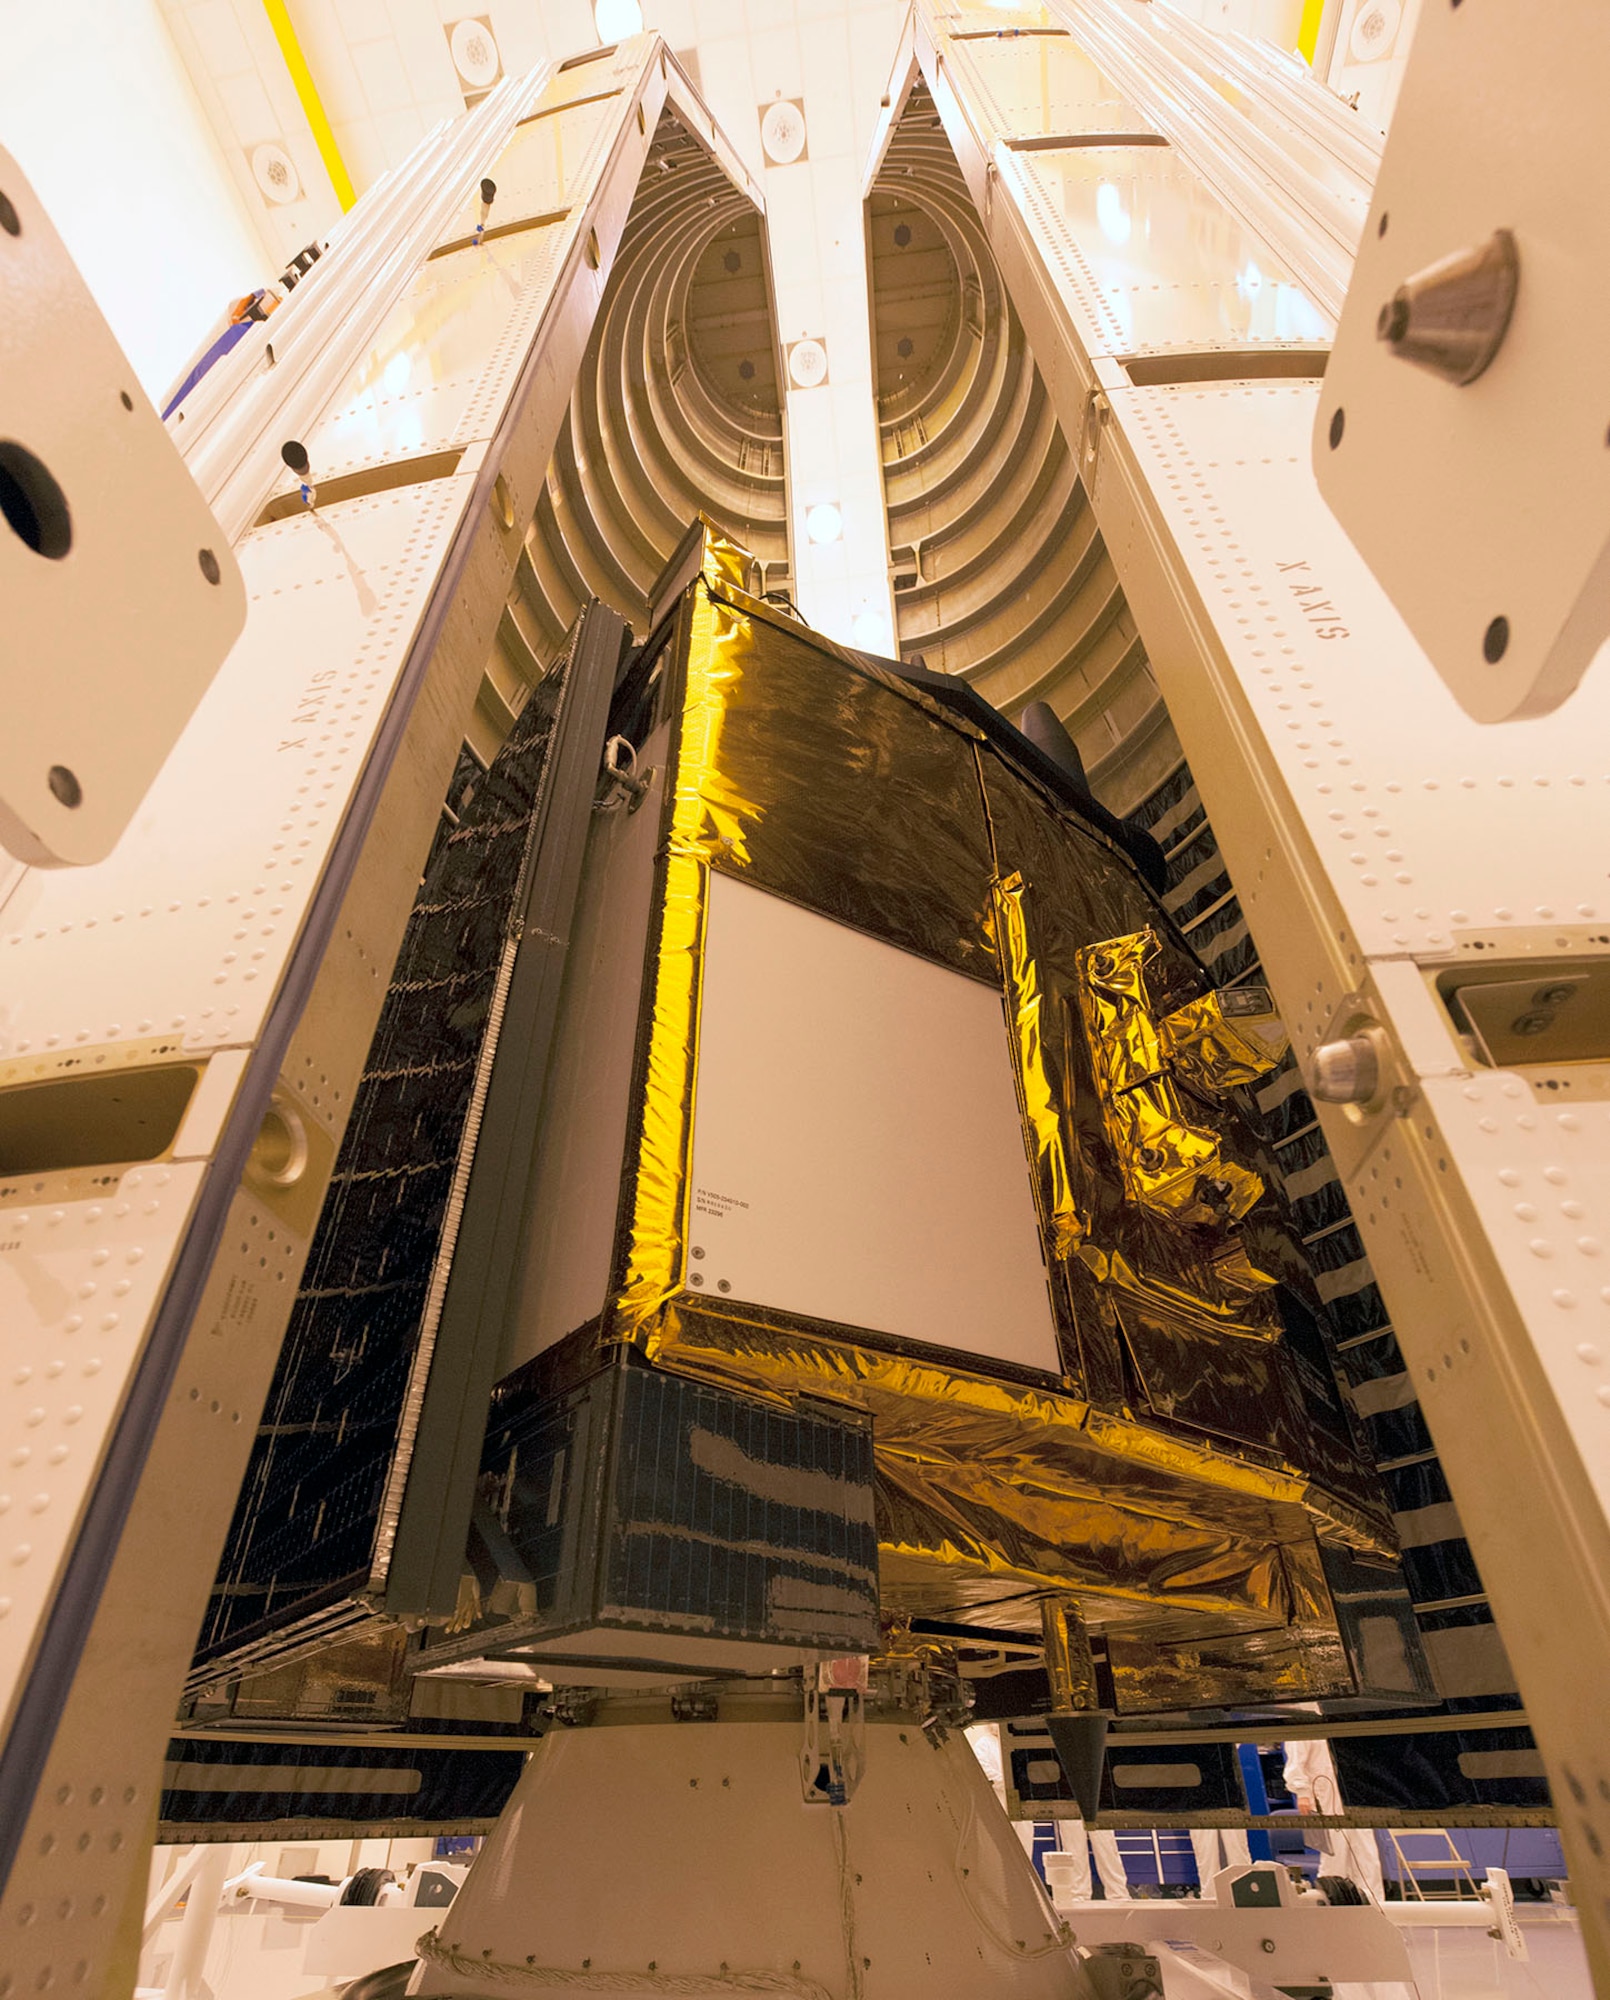 A close-up image of a Global Positioning System IIF-series satellite as it sits atop its payload adapter awaiting final encapsulation within a 4-meter diameter protective fairing Oct. 21 at Cape Canaveral Air Force Station, Fla. The Air Force and its mission partners are scheduled to launch the GPS IIF-11 aboard a United Launch Alliance Atlas V 401 launch vehicle Oct. 30 from Cape Canaveral AFS, Fla. The launch window is set to open at 12:17 p.m. EDT and will remain open for 18 minutes. (United Launch Alliance courtesy photo) 